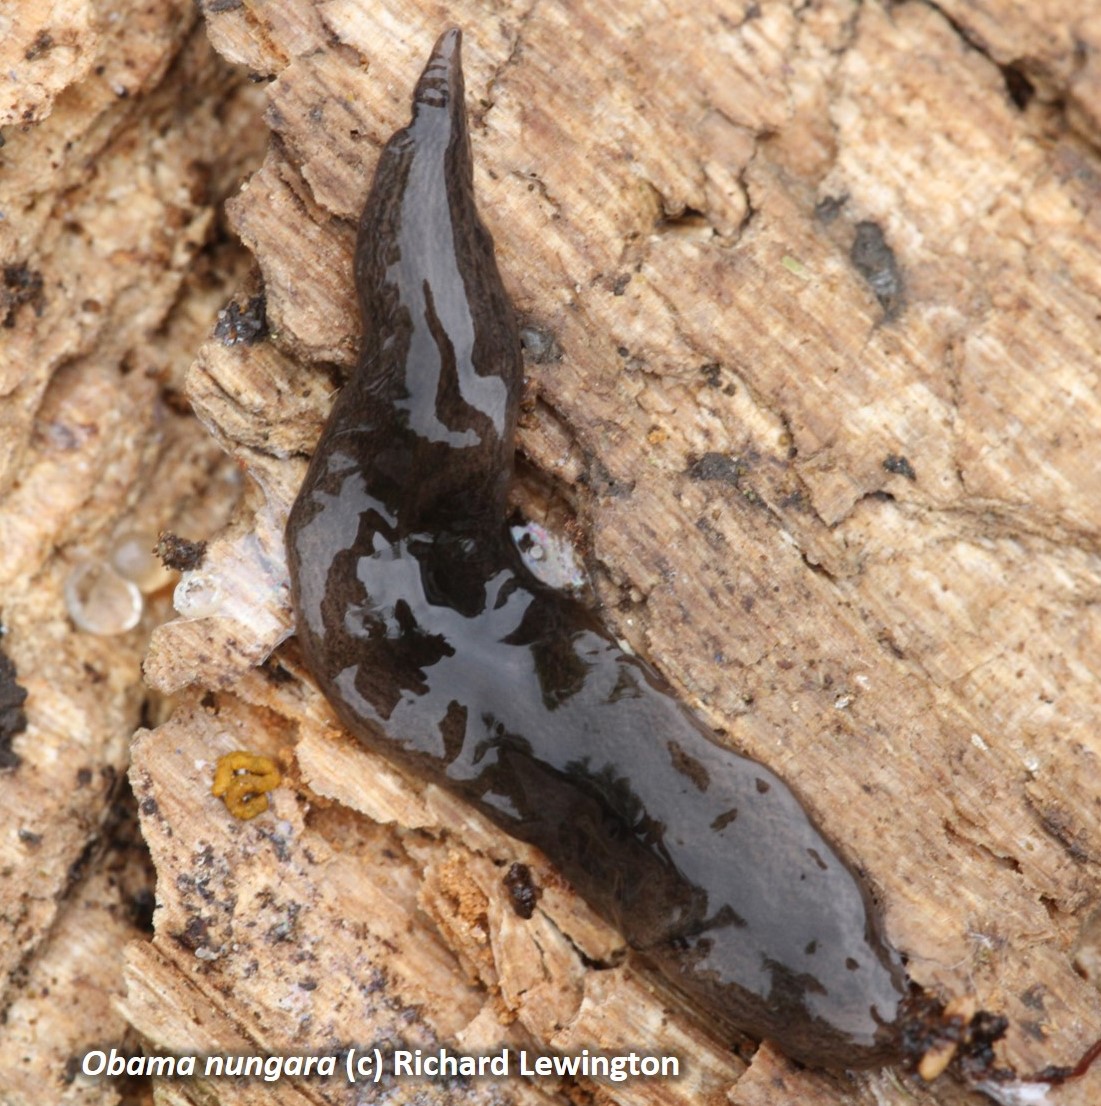 Obama Flatworm (c) Richard Lewington (all rights reserved)